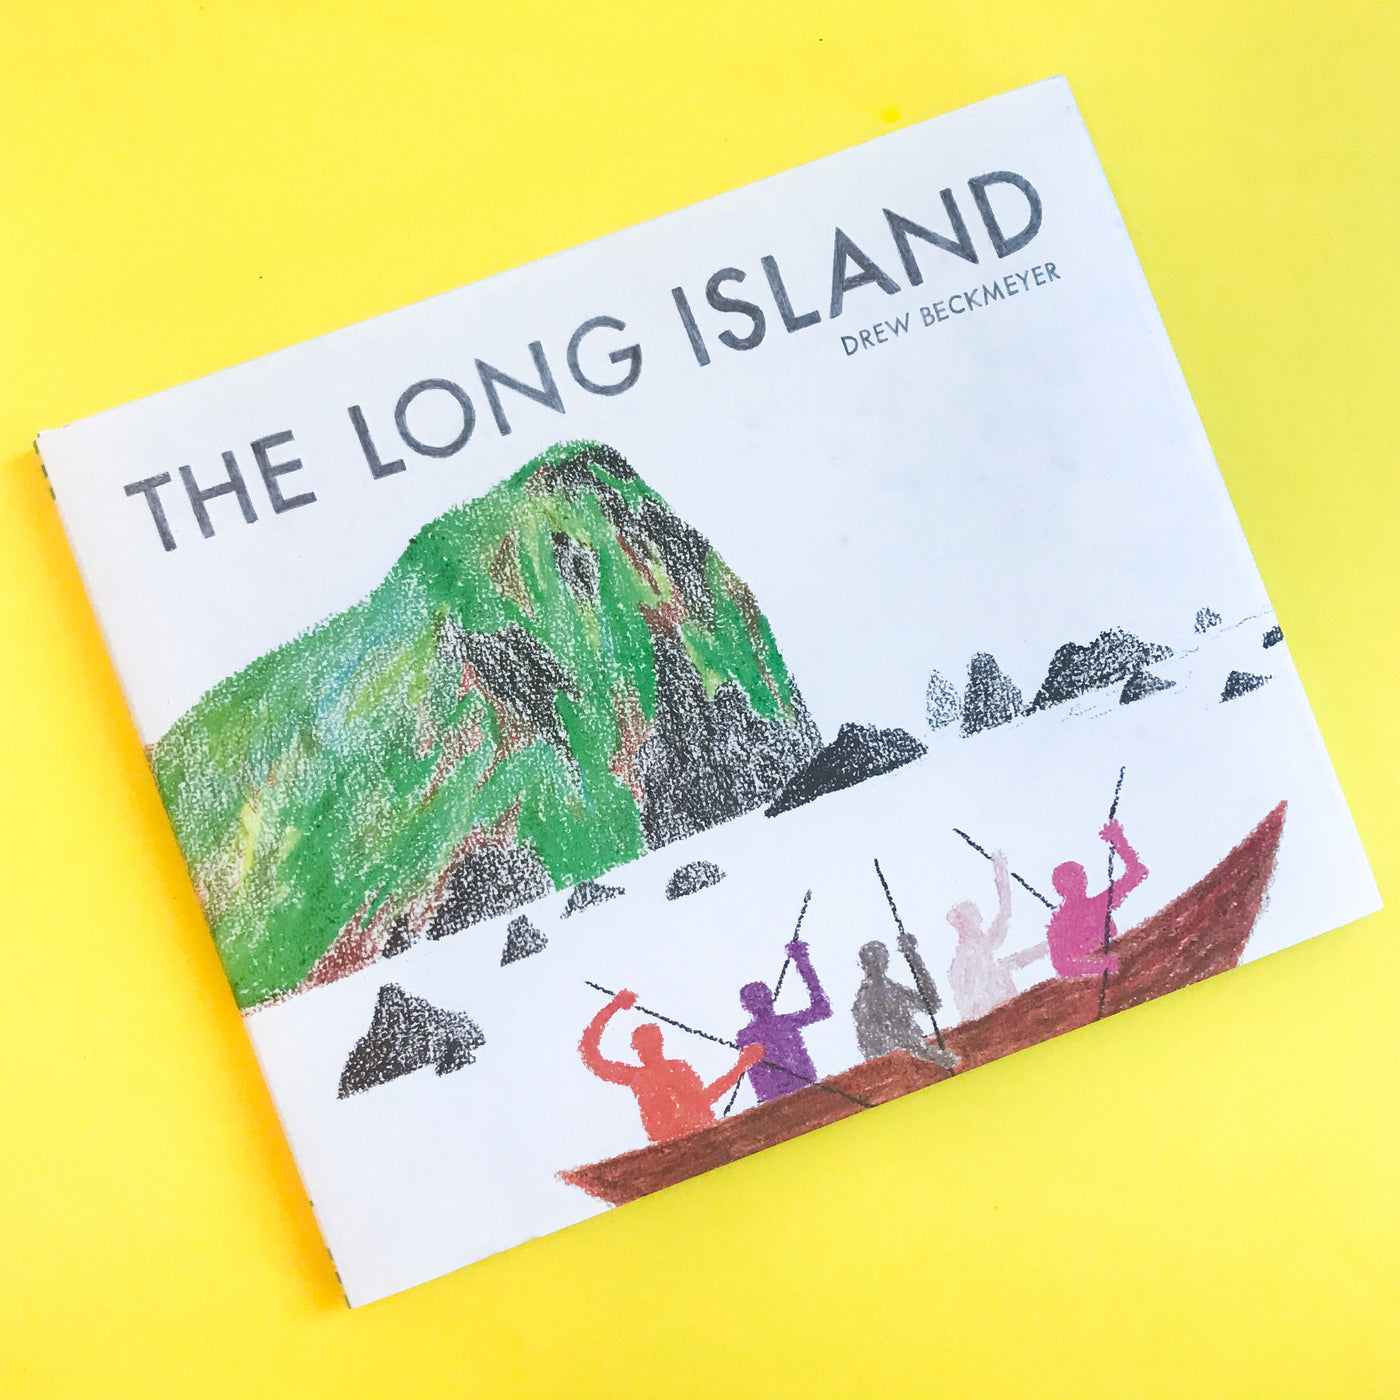 The Long Island by Drew Beckmeyer